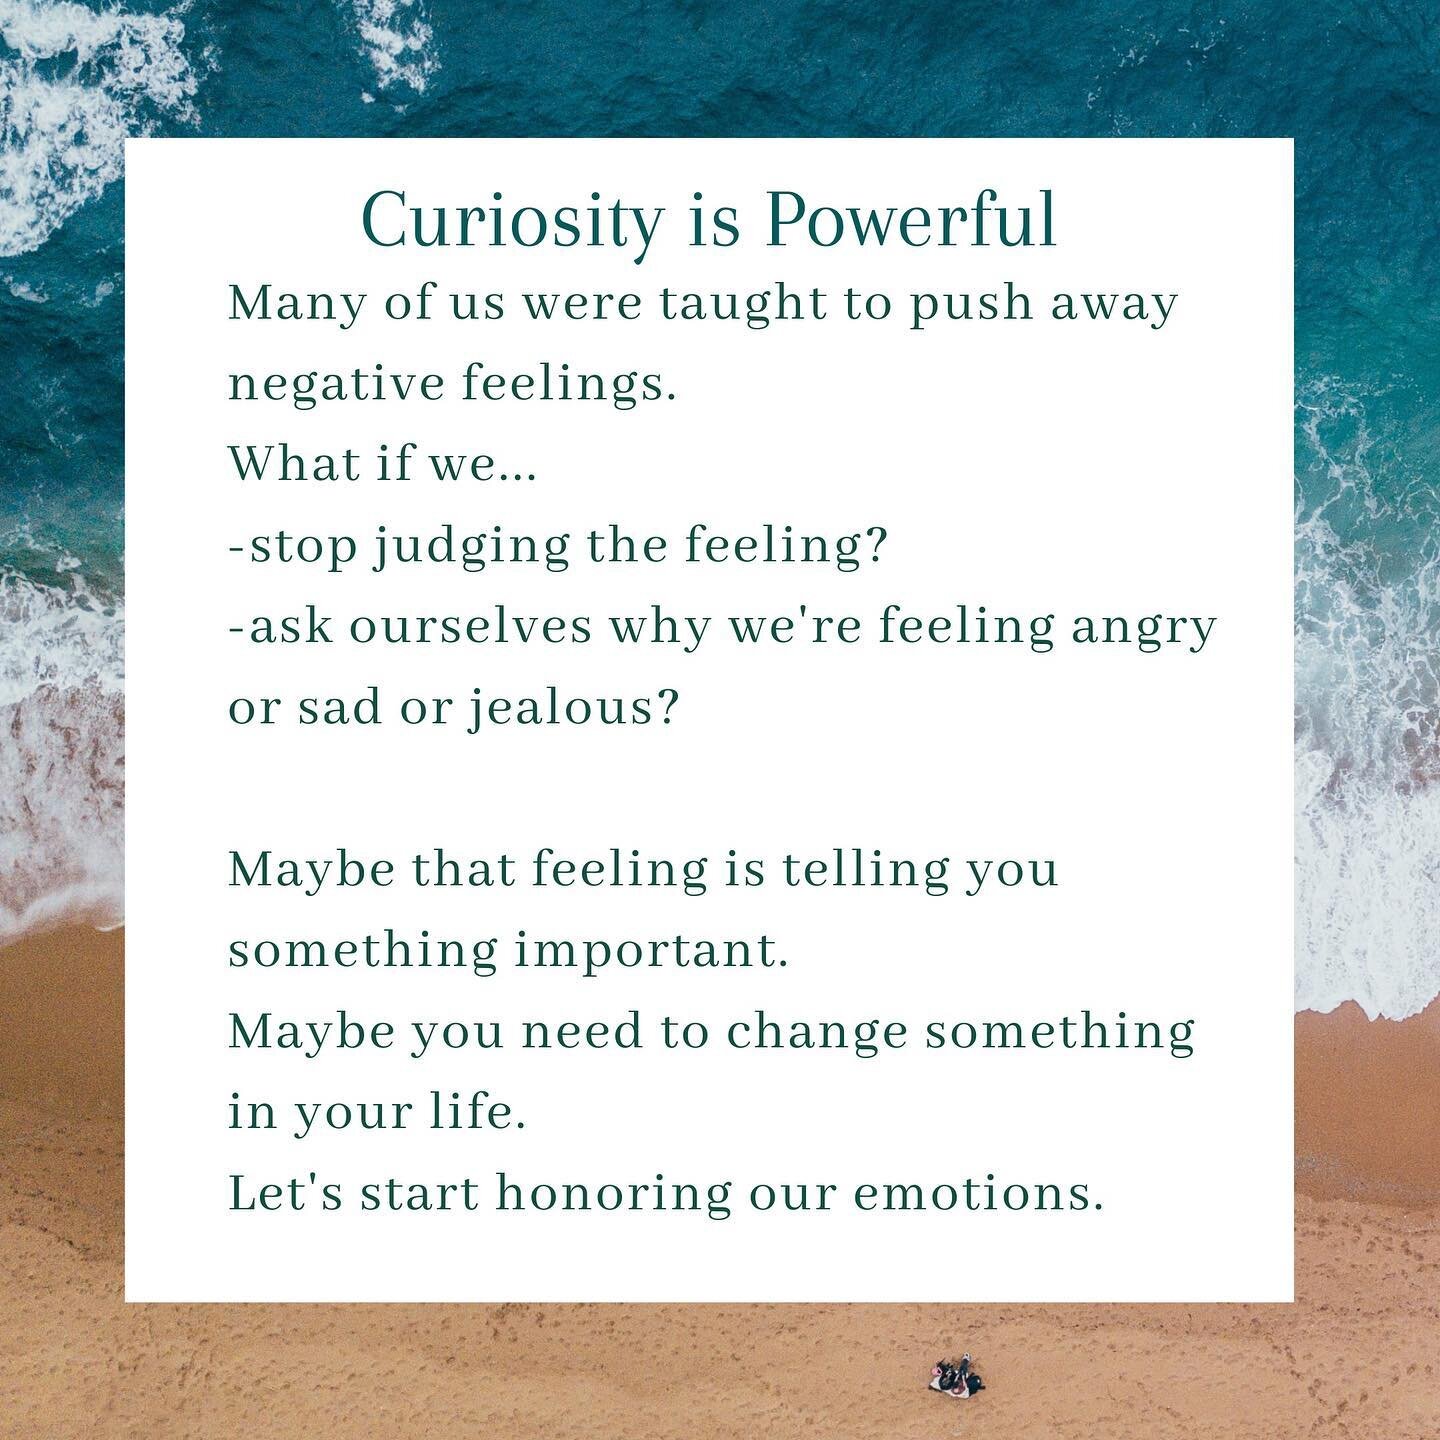 #psychology #counseling #anxiety #healing #depression #selflove